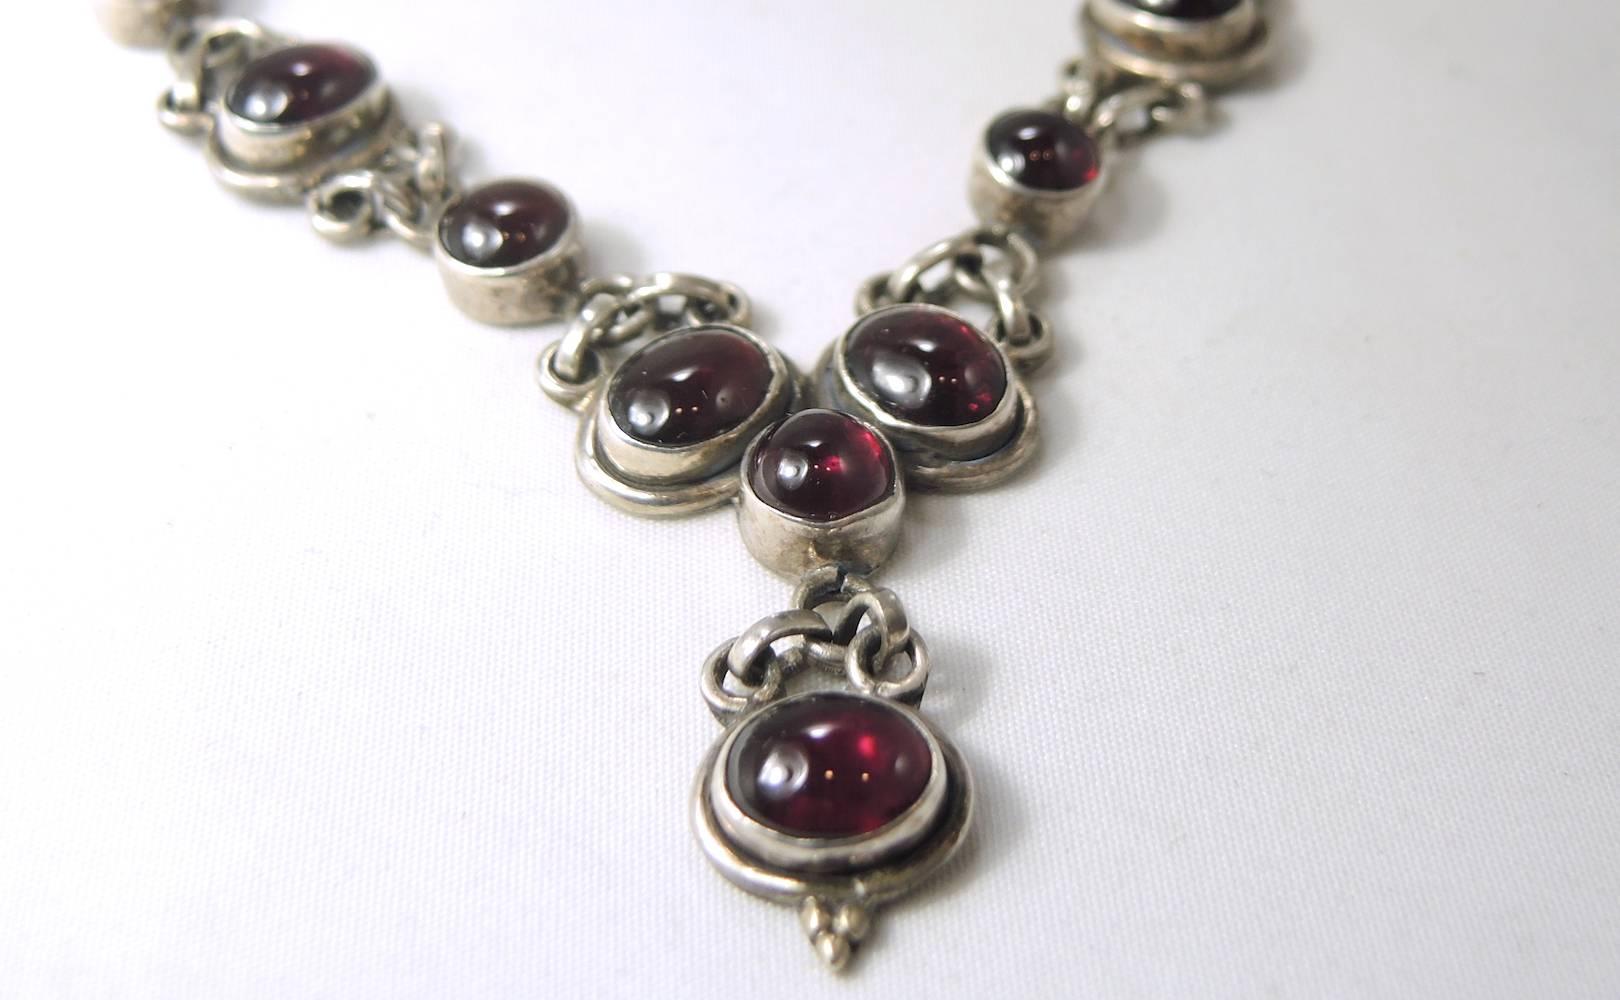 This beautiful set is made with oval garnet cabochons set into sterling silver bezels. The cabochons alternate from oval to round and lead down to the center dangling cabochons.  It has the old fashioned lobster clasp and measures 18” and the center